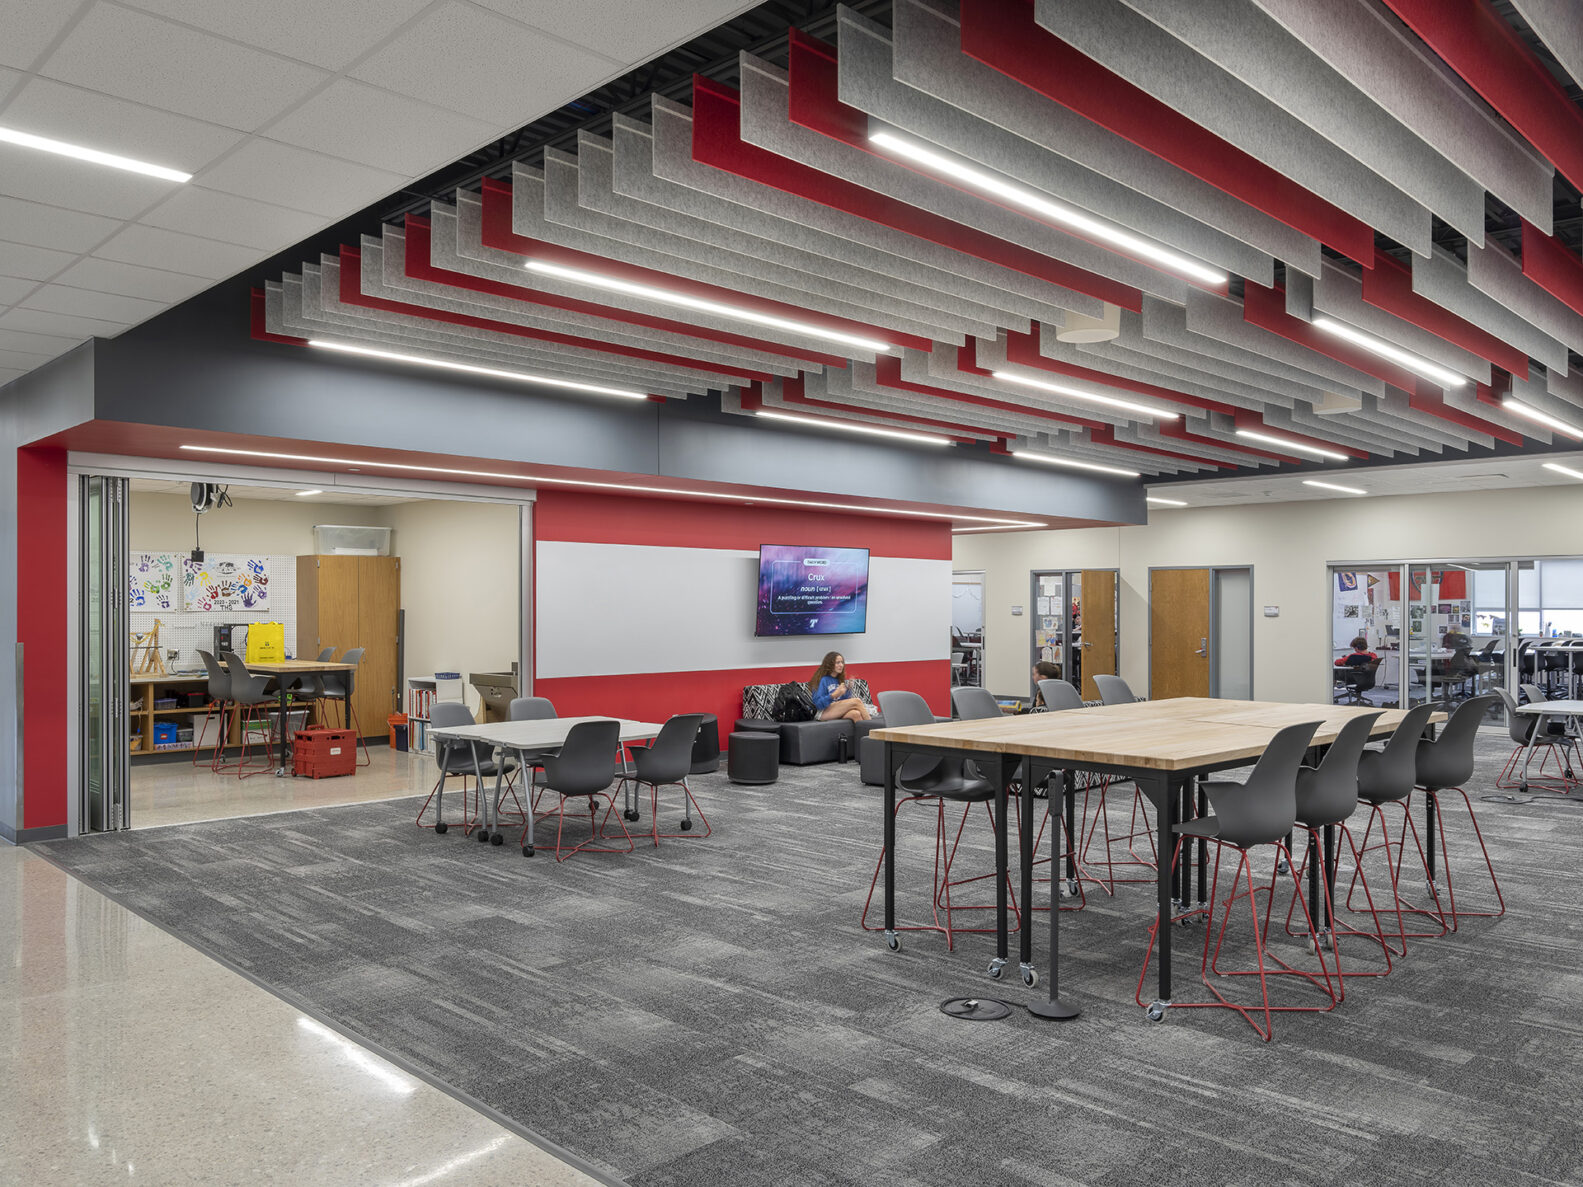 A large classroom at Tonganoxie High School, renovated by McCownGordon Construction